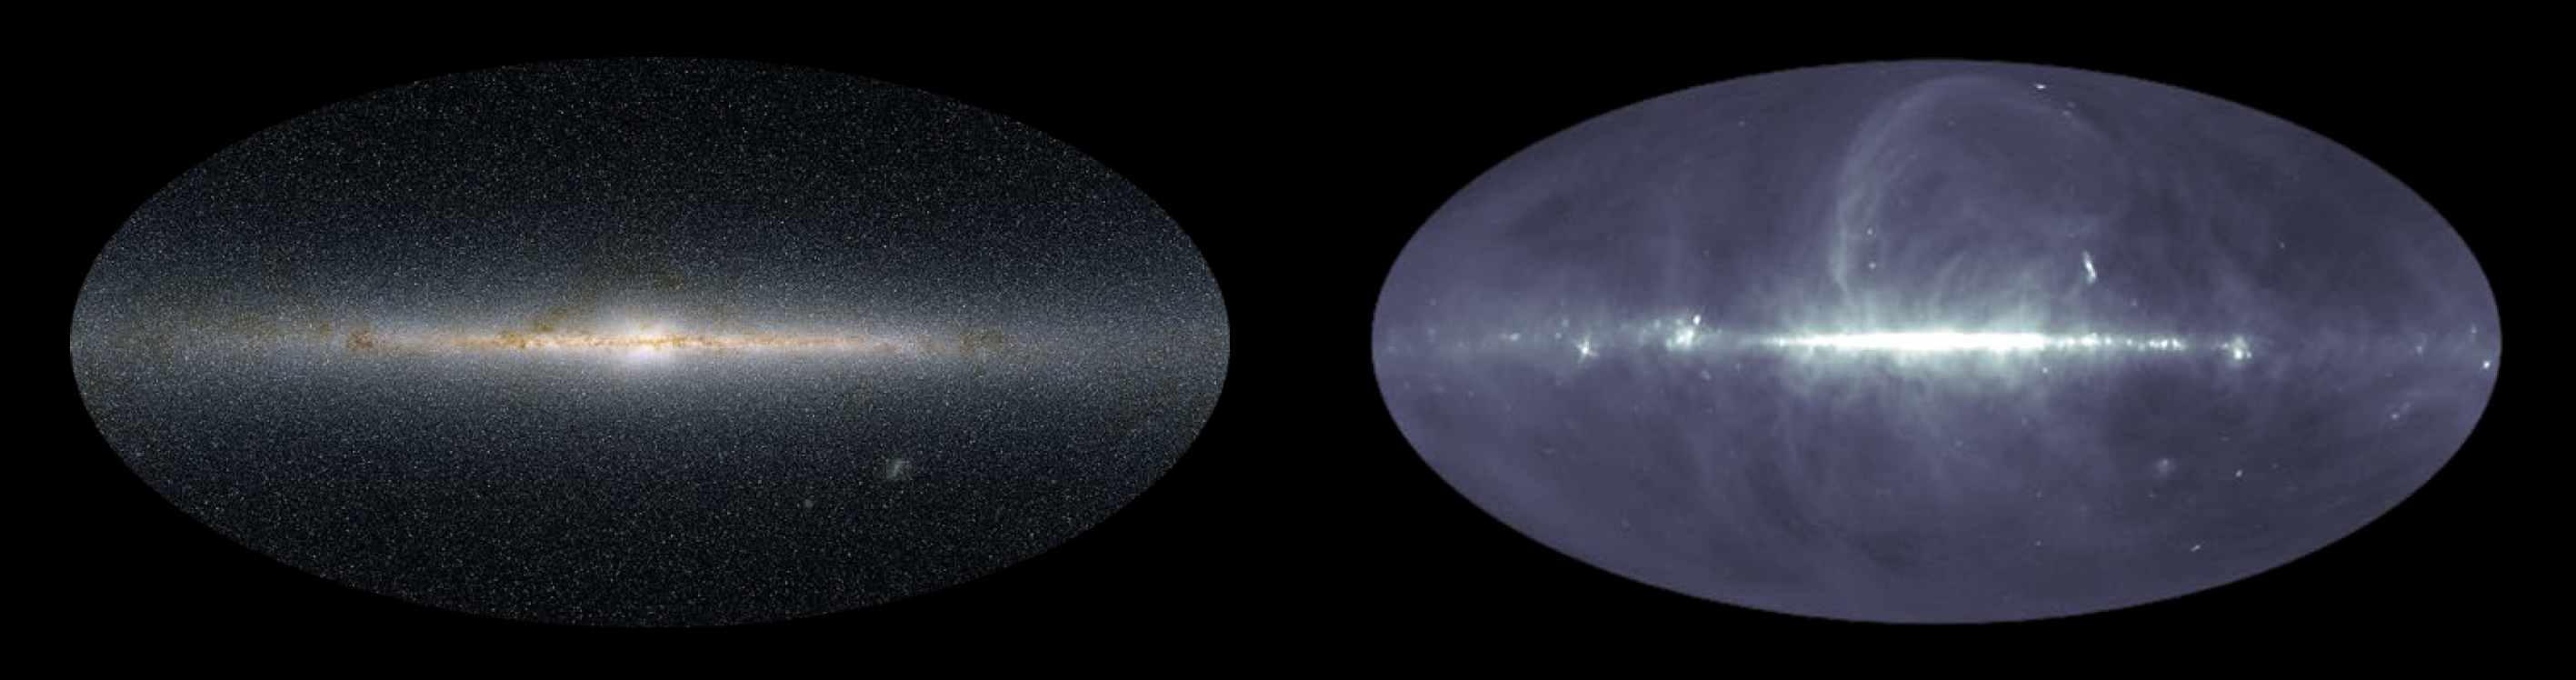 two oval-shaped views of the sky are shown. The left shows stars and galaxies in visible light, the right shows cloudy wisps and fewer but no less bright dots that look like stars, only they are detected at radiowave energies.